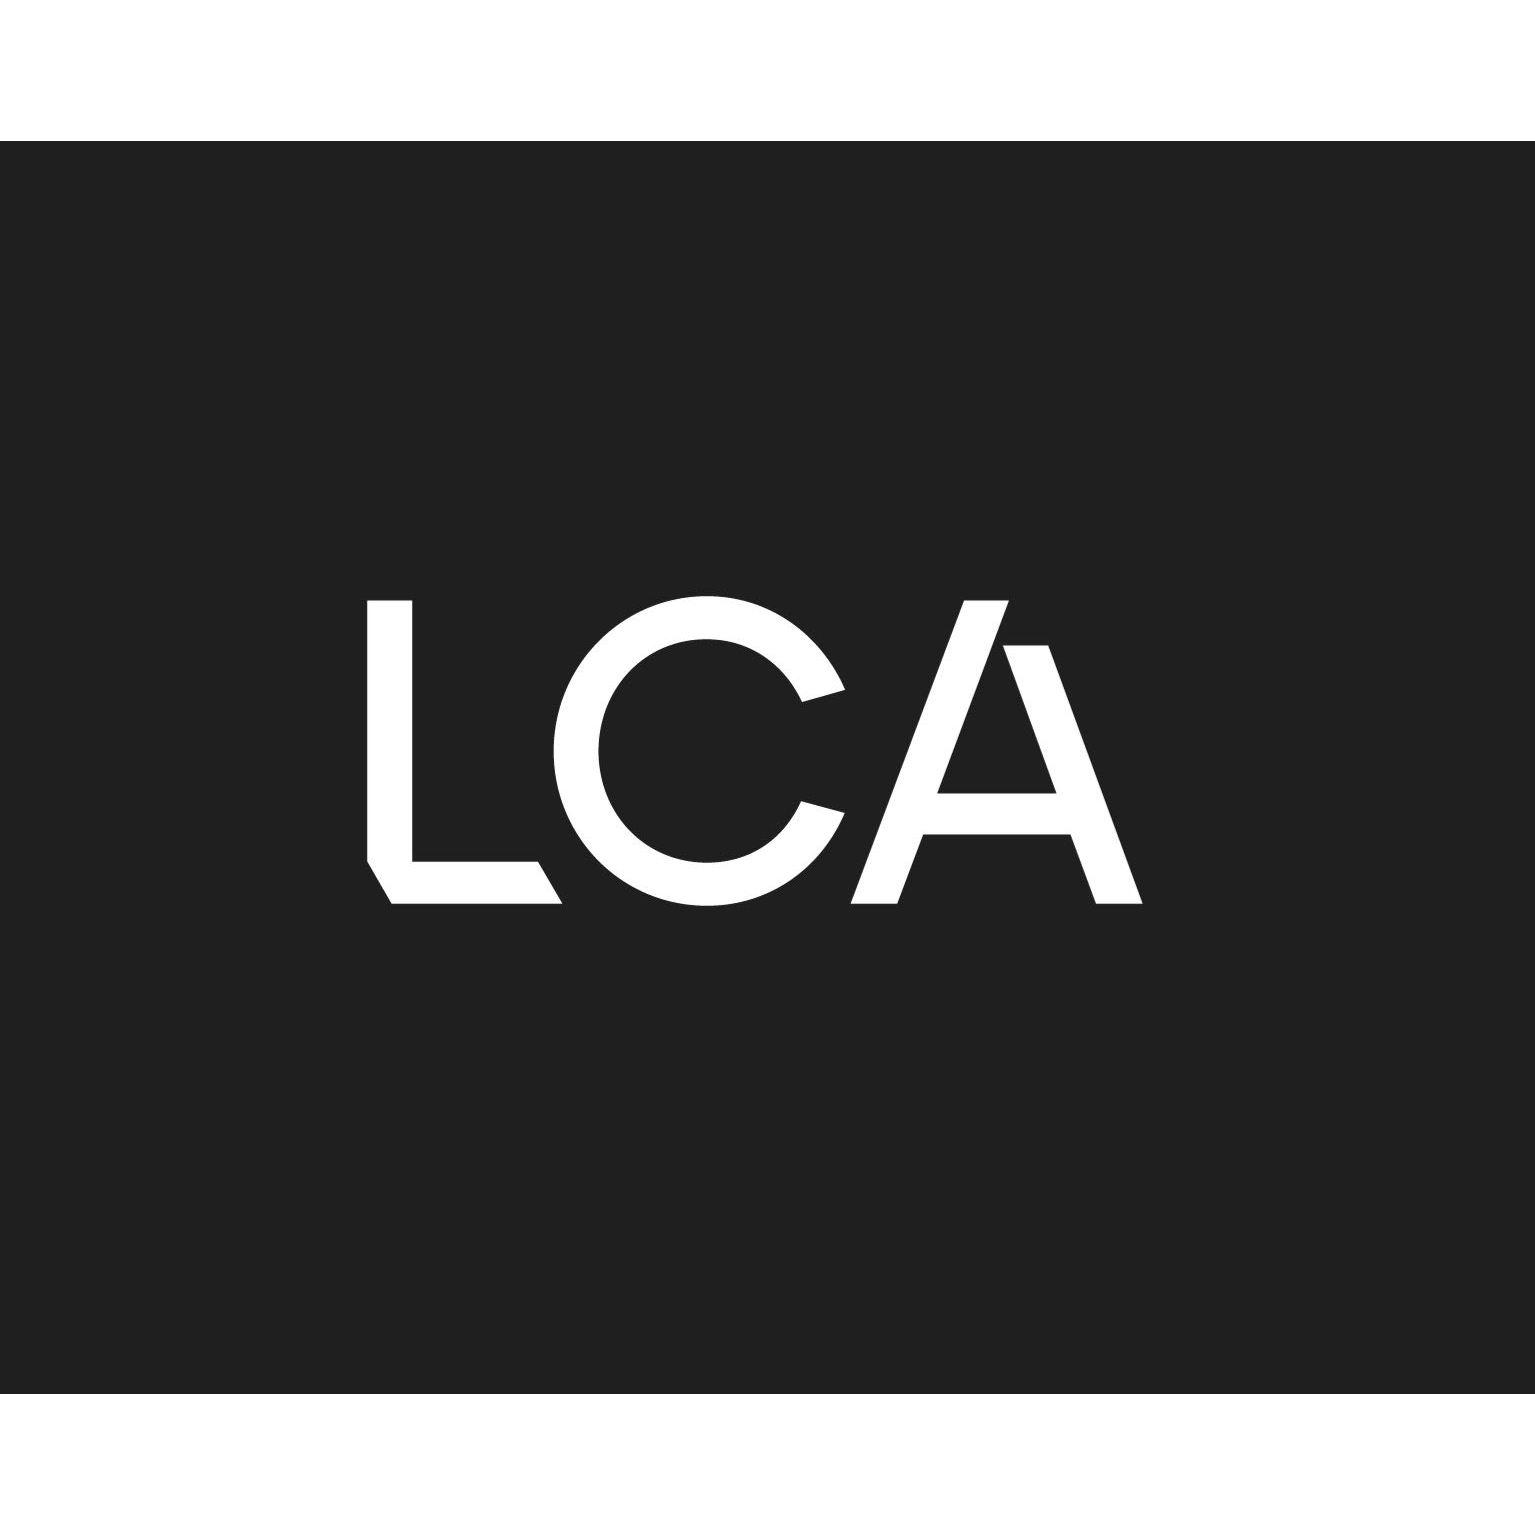 Lewis Critchley Architects Logo